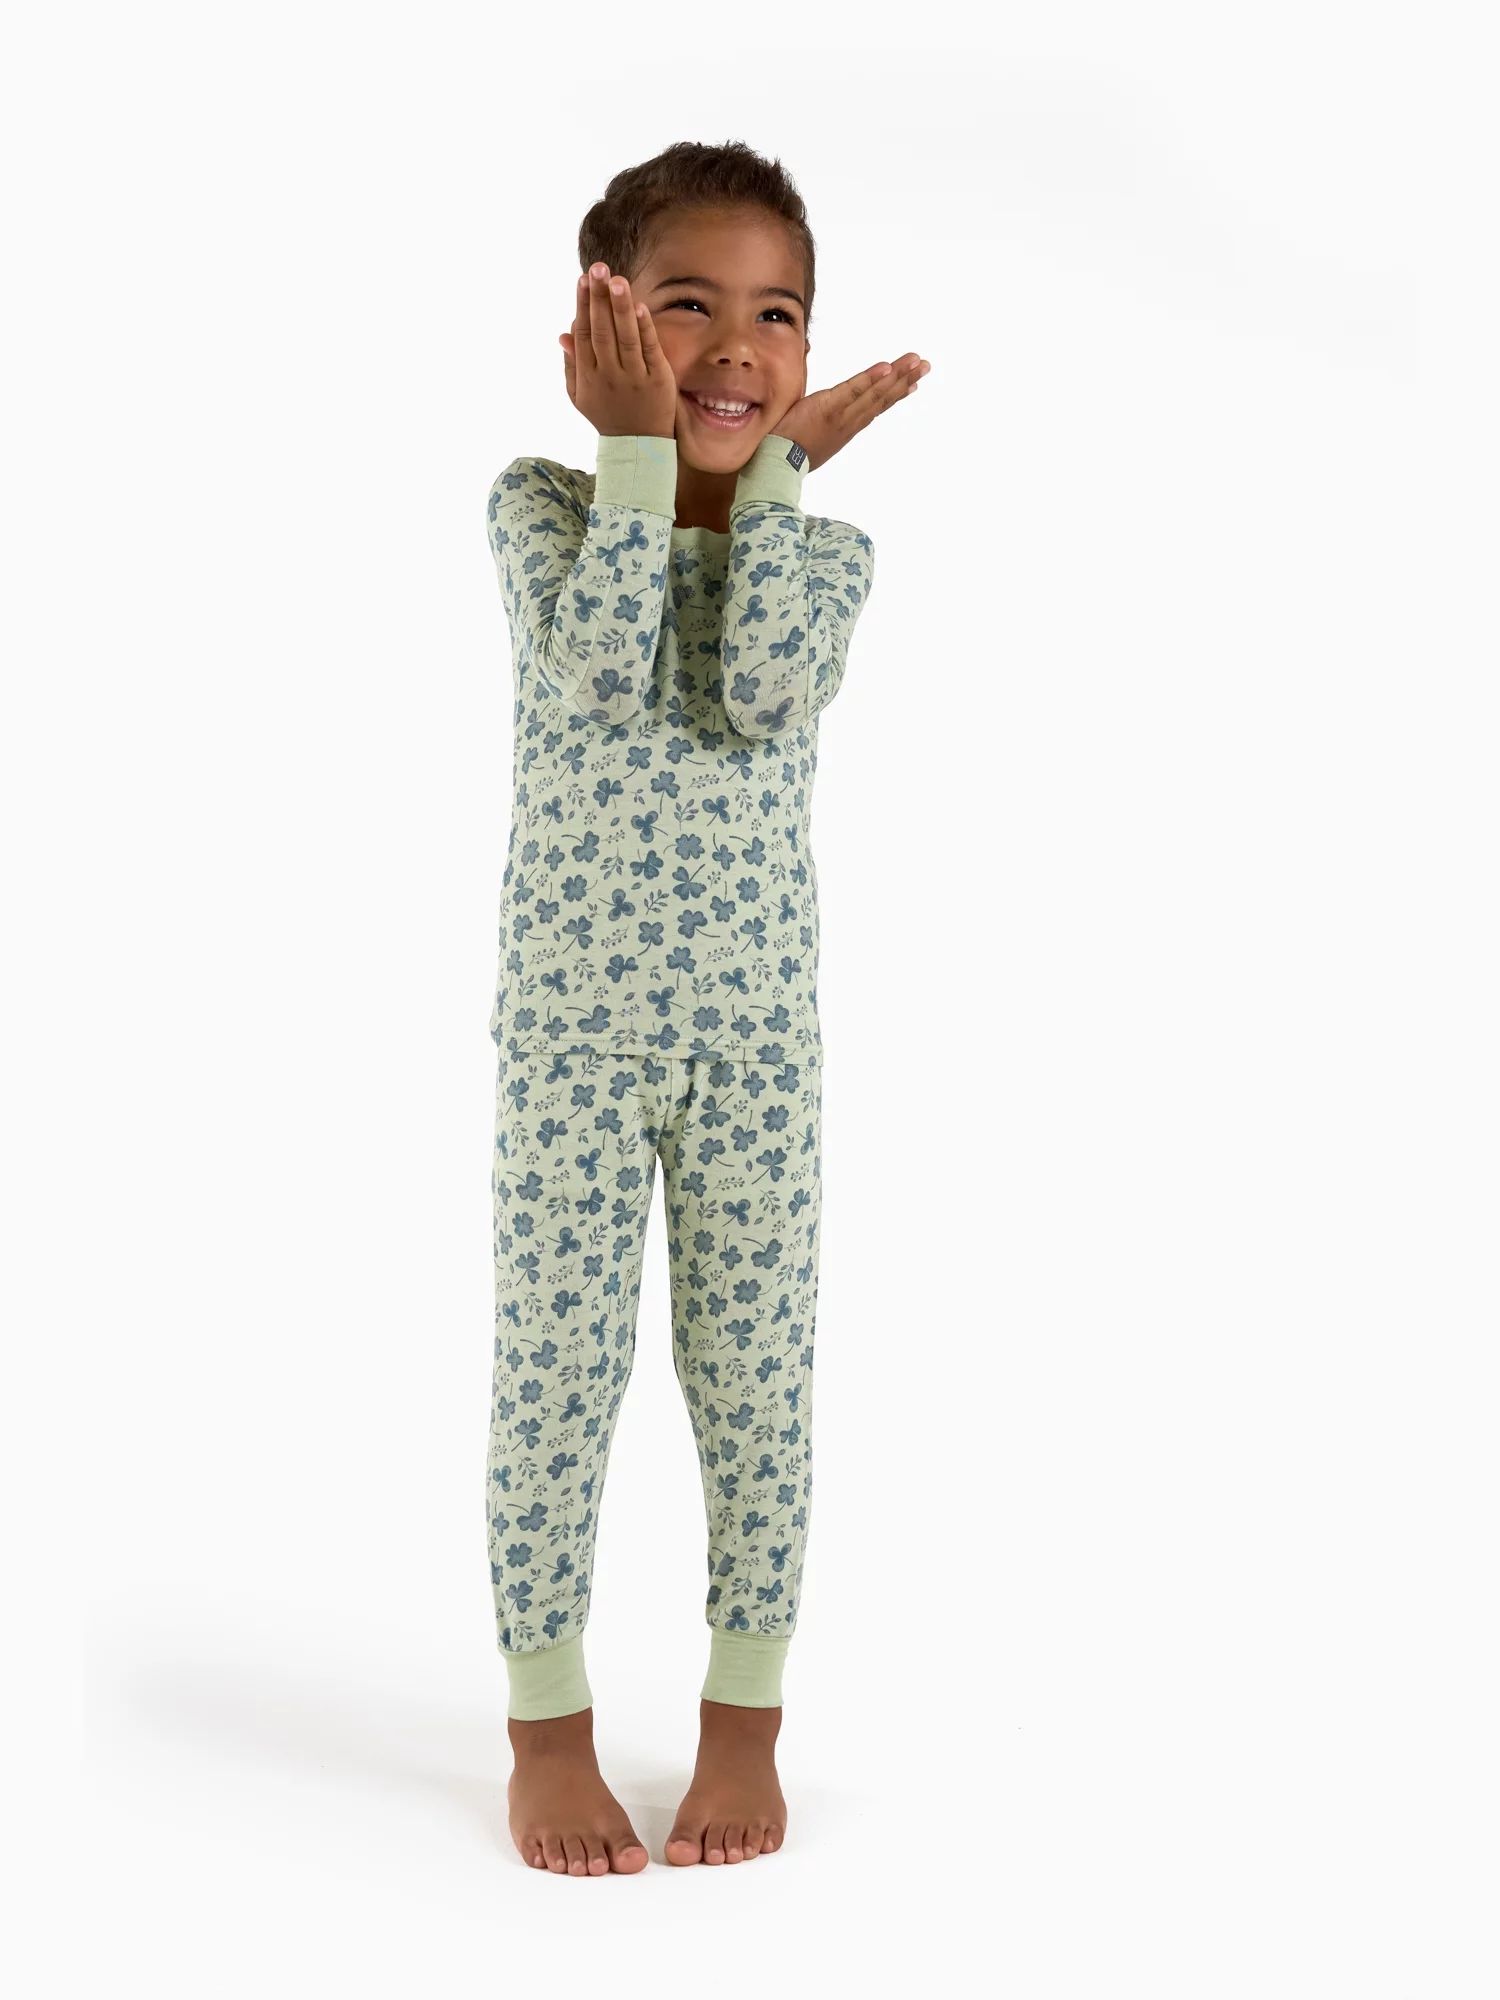 Modern Moments by Gerber Toddler Unisex St. Patrick's Day Pajama Set, 2-Piece, Sizes 12M-5T | Walmart (US)